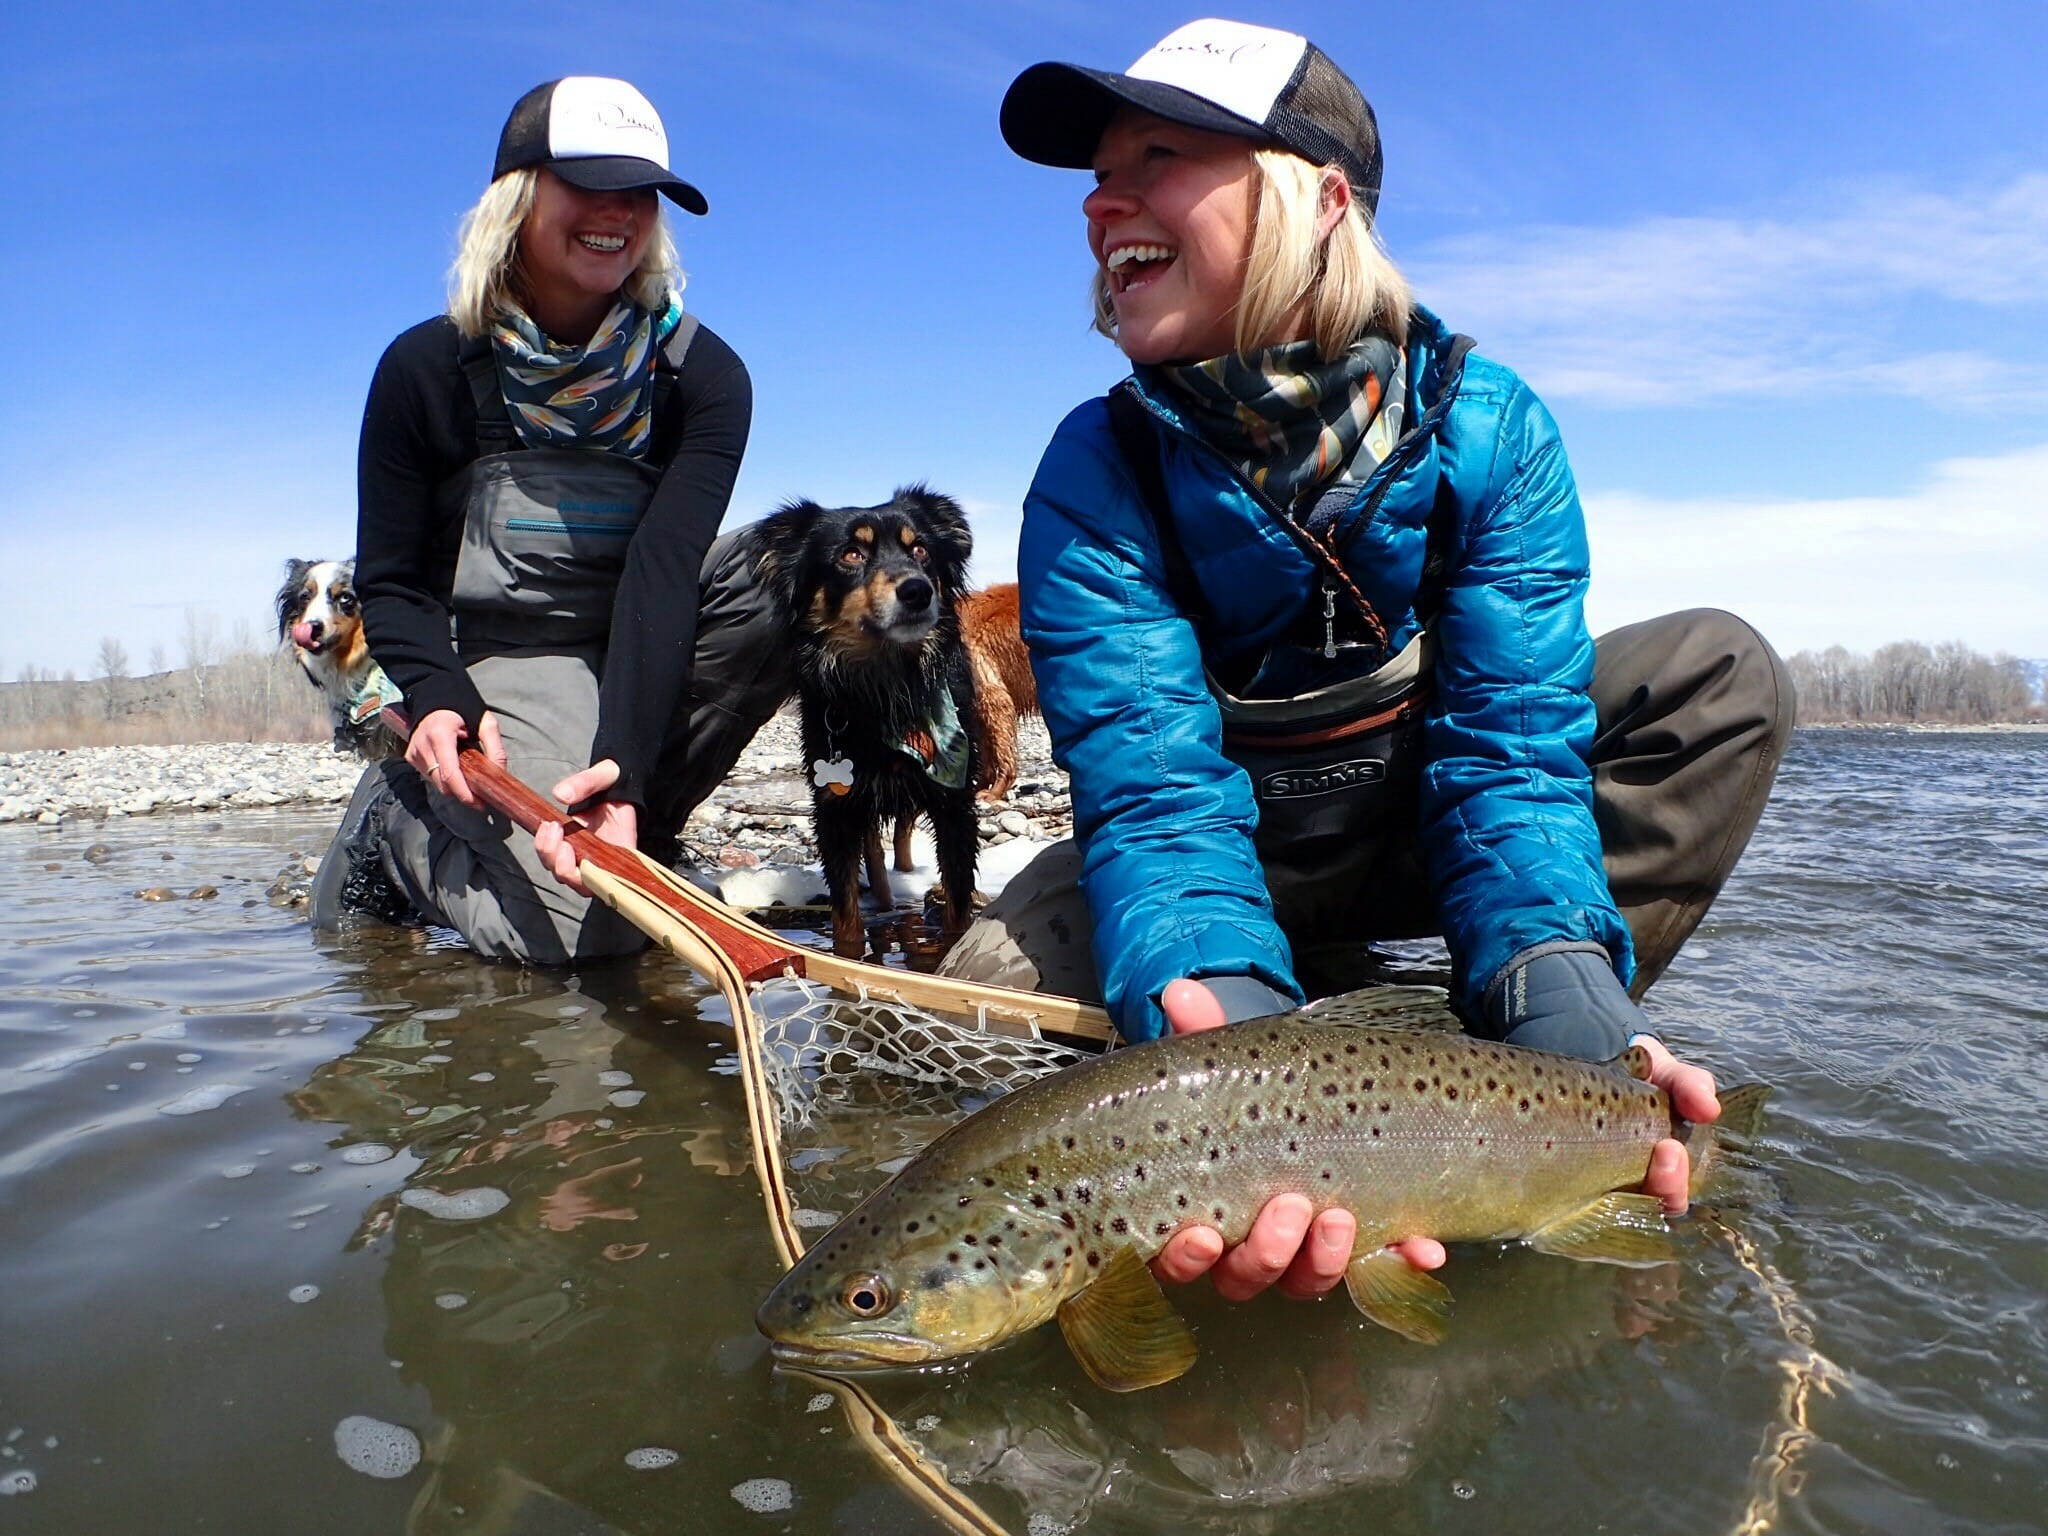 Damsel Fly Fishing Brings Women To Fly Fishing Fun - Trout Unlimited